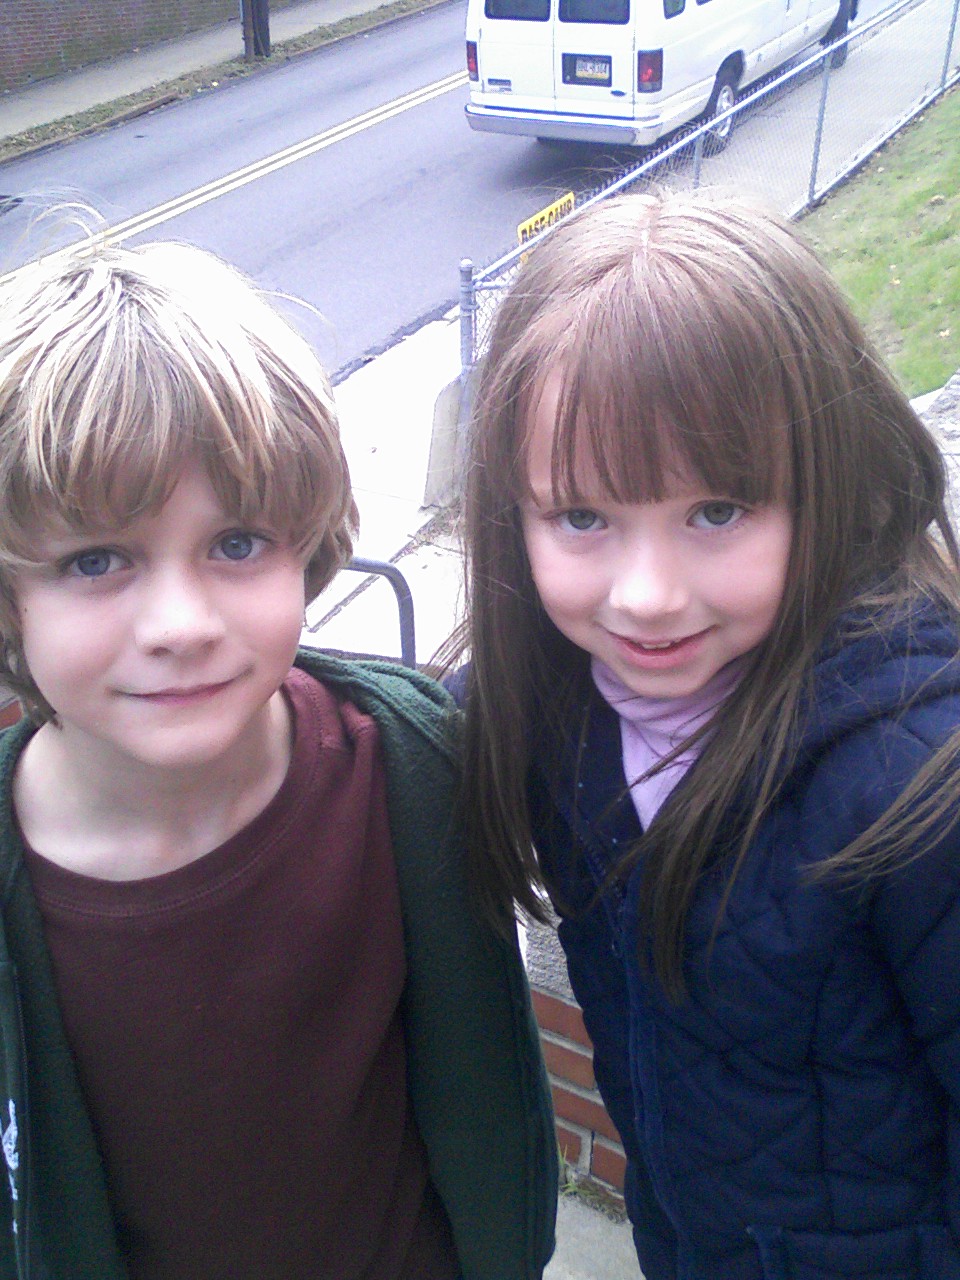 Peyton Allen and Ty Simpkins of The Next Three Days